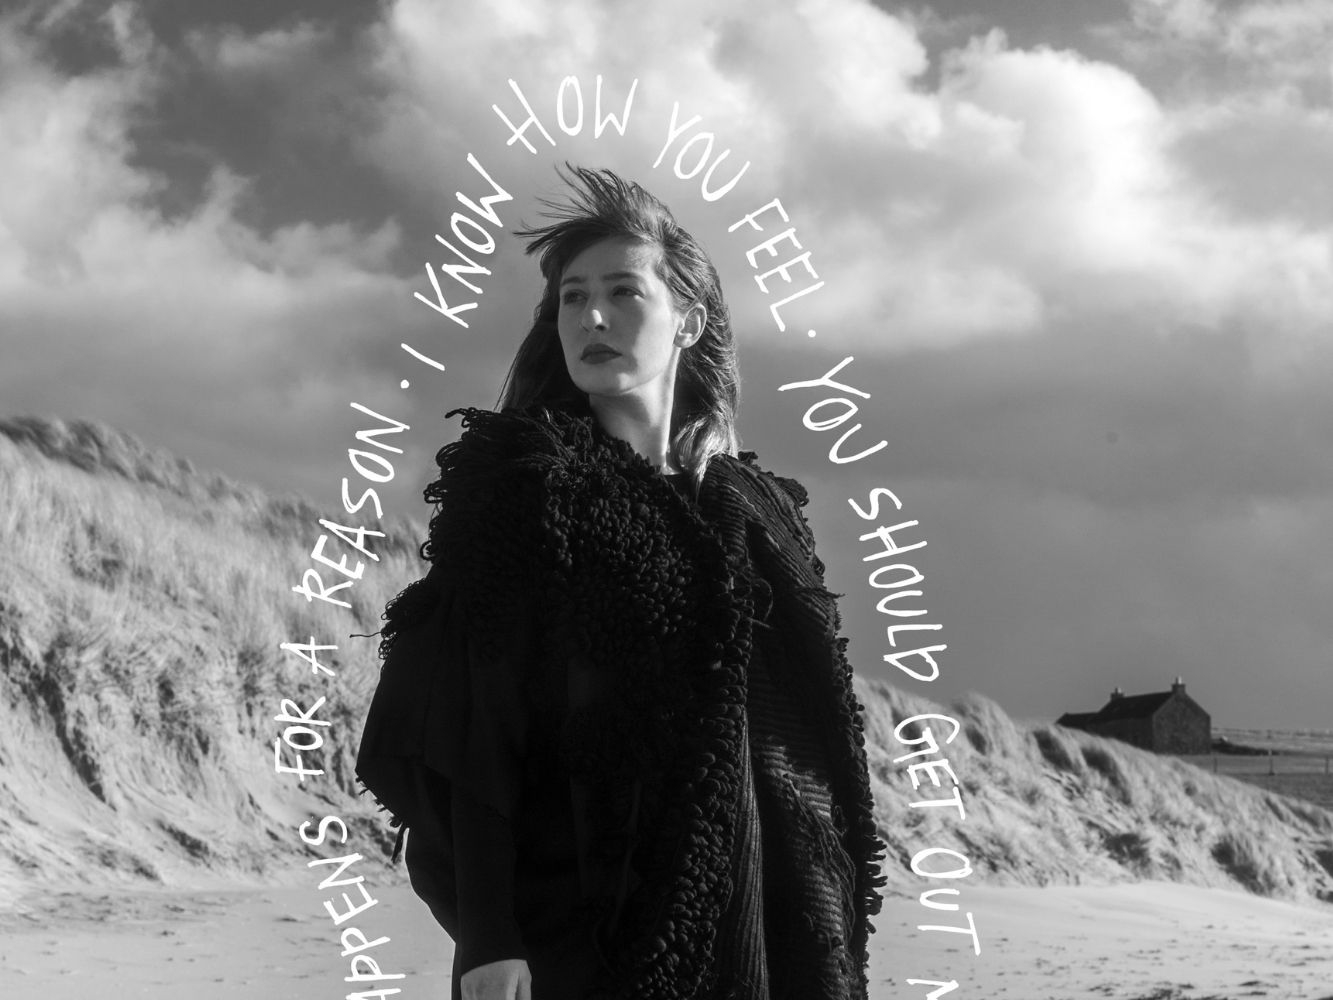 Keira Thomson standing on a beach, she is lined by 'damaging phrases'